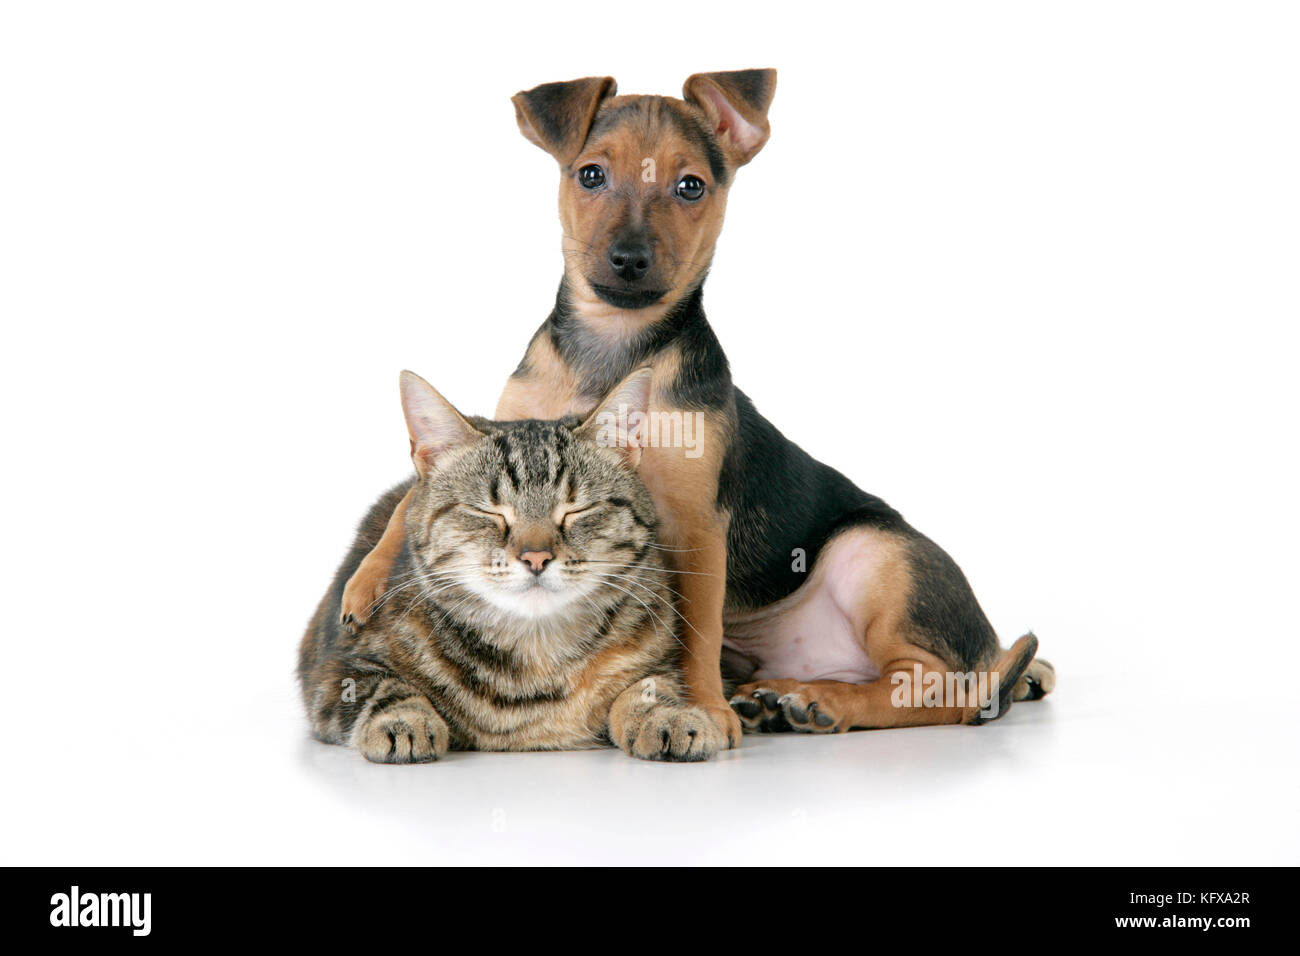 Dog - Chihuahua cross Dachshund - 7 week old puppy with Tabby cat Stock Photo